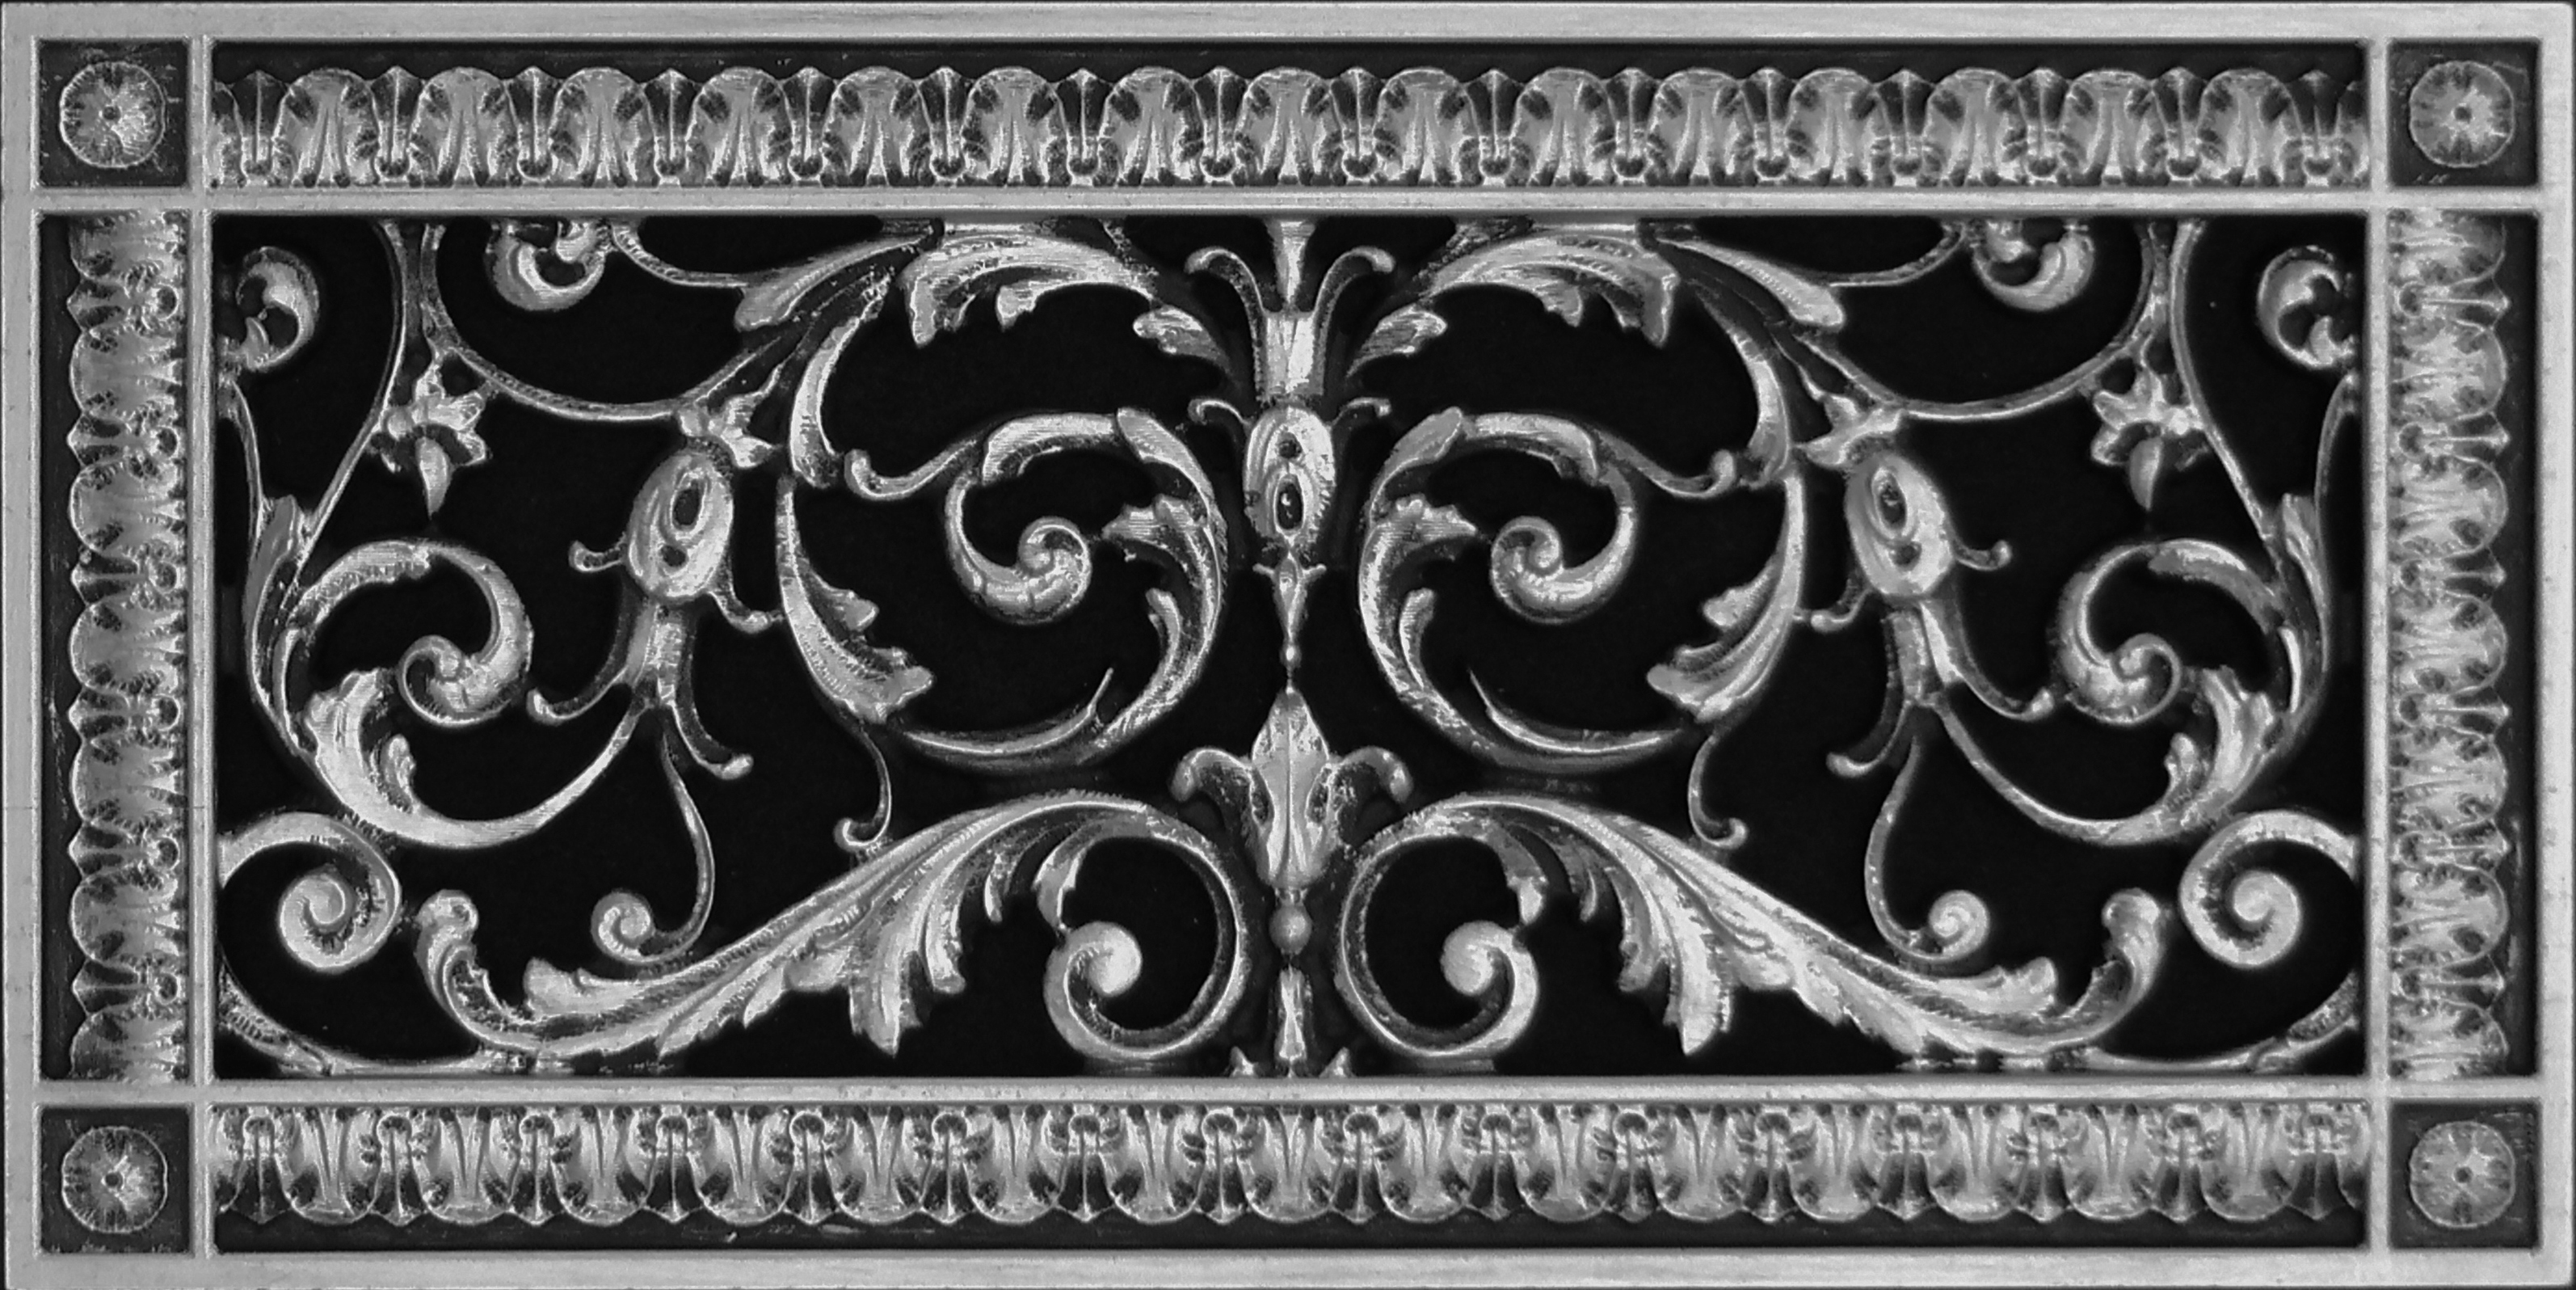 6" x 14" Louis XIV style decorative grille in a Pewter Finish